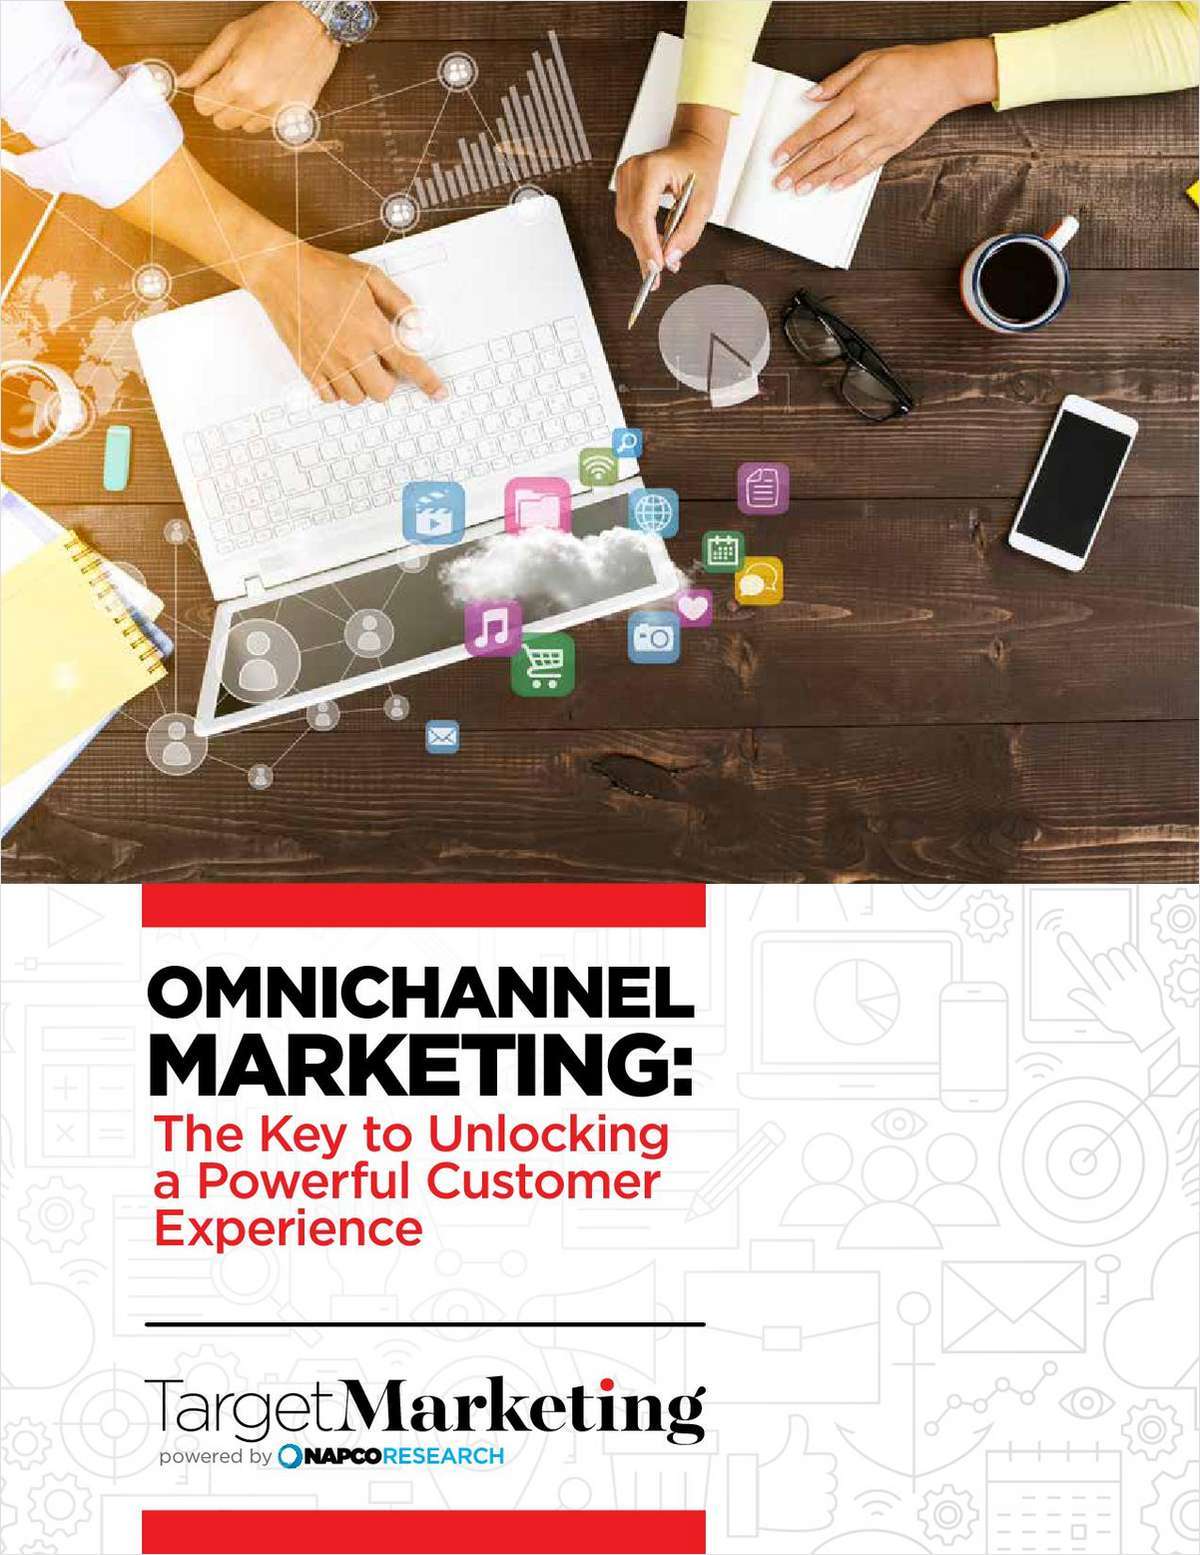 Omnichannel Marketing: The Key to Unlocking a Powerful Customer Experience